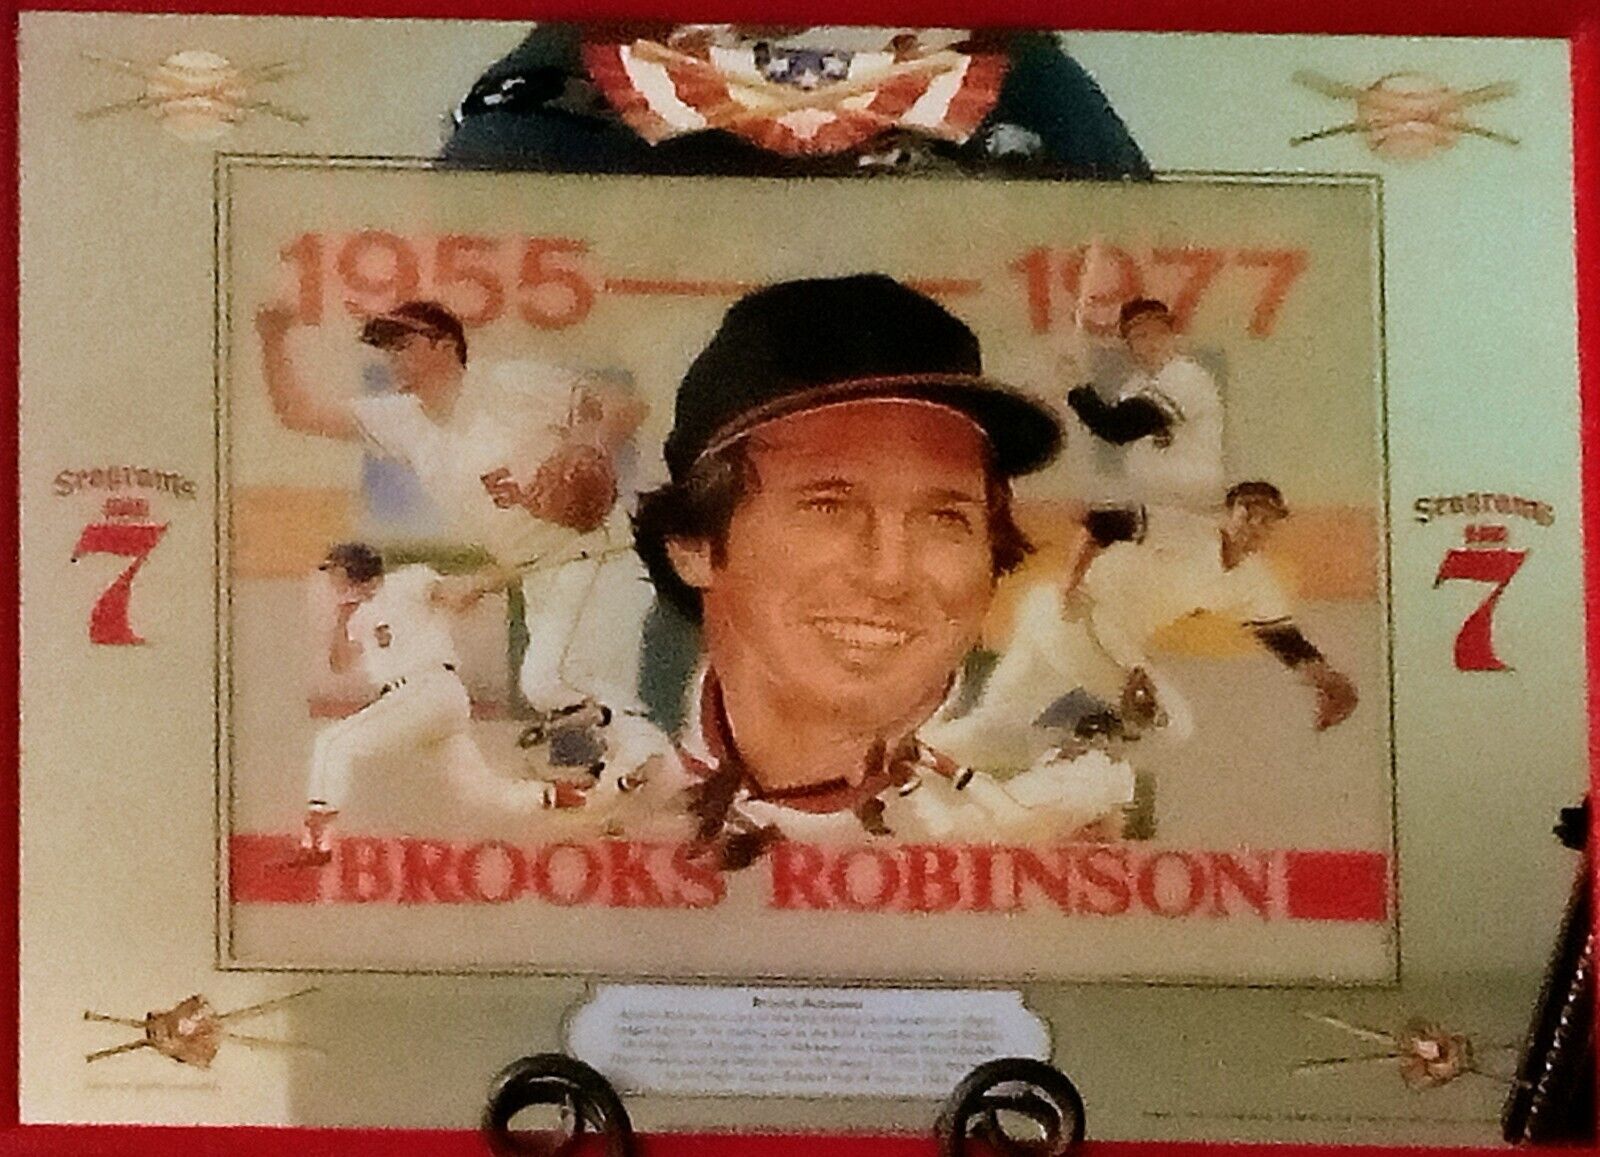 seagrams 7 collectible distillery art featuring Hall of Famer Brooks Robinson